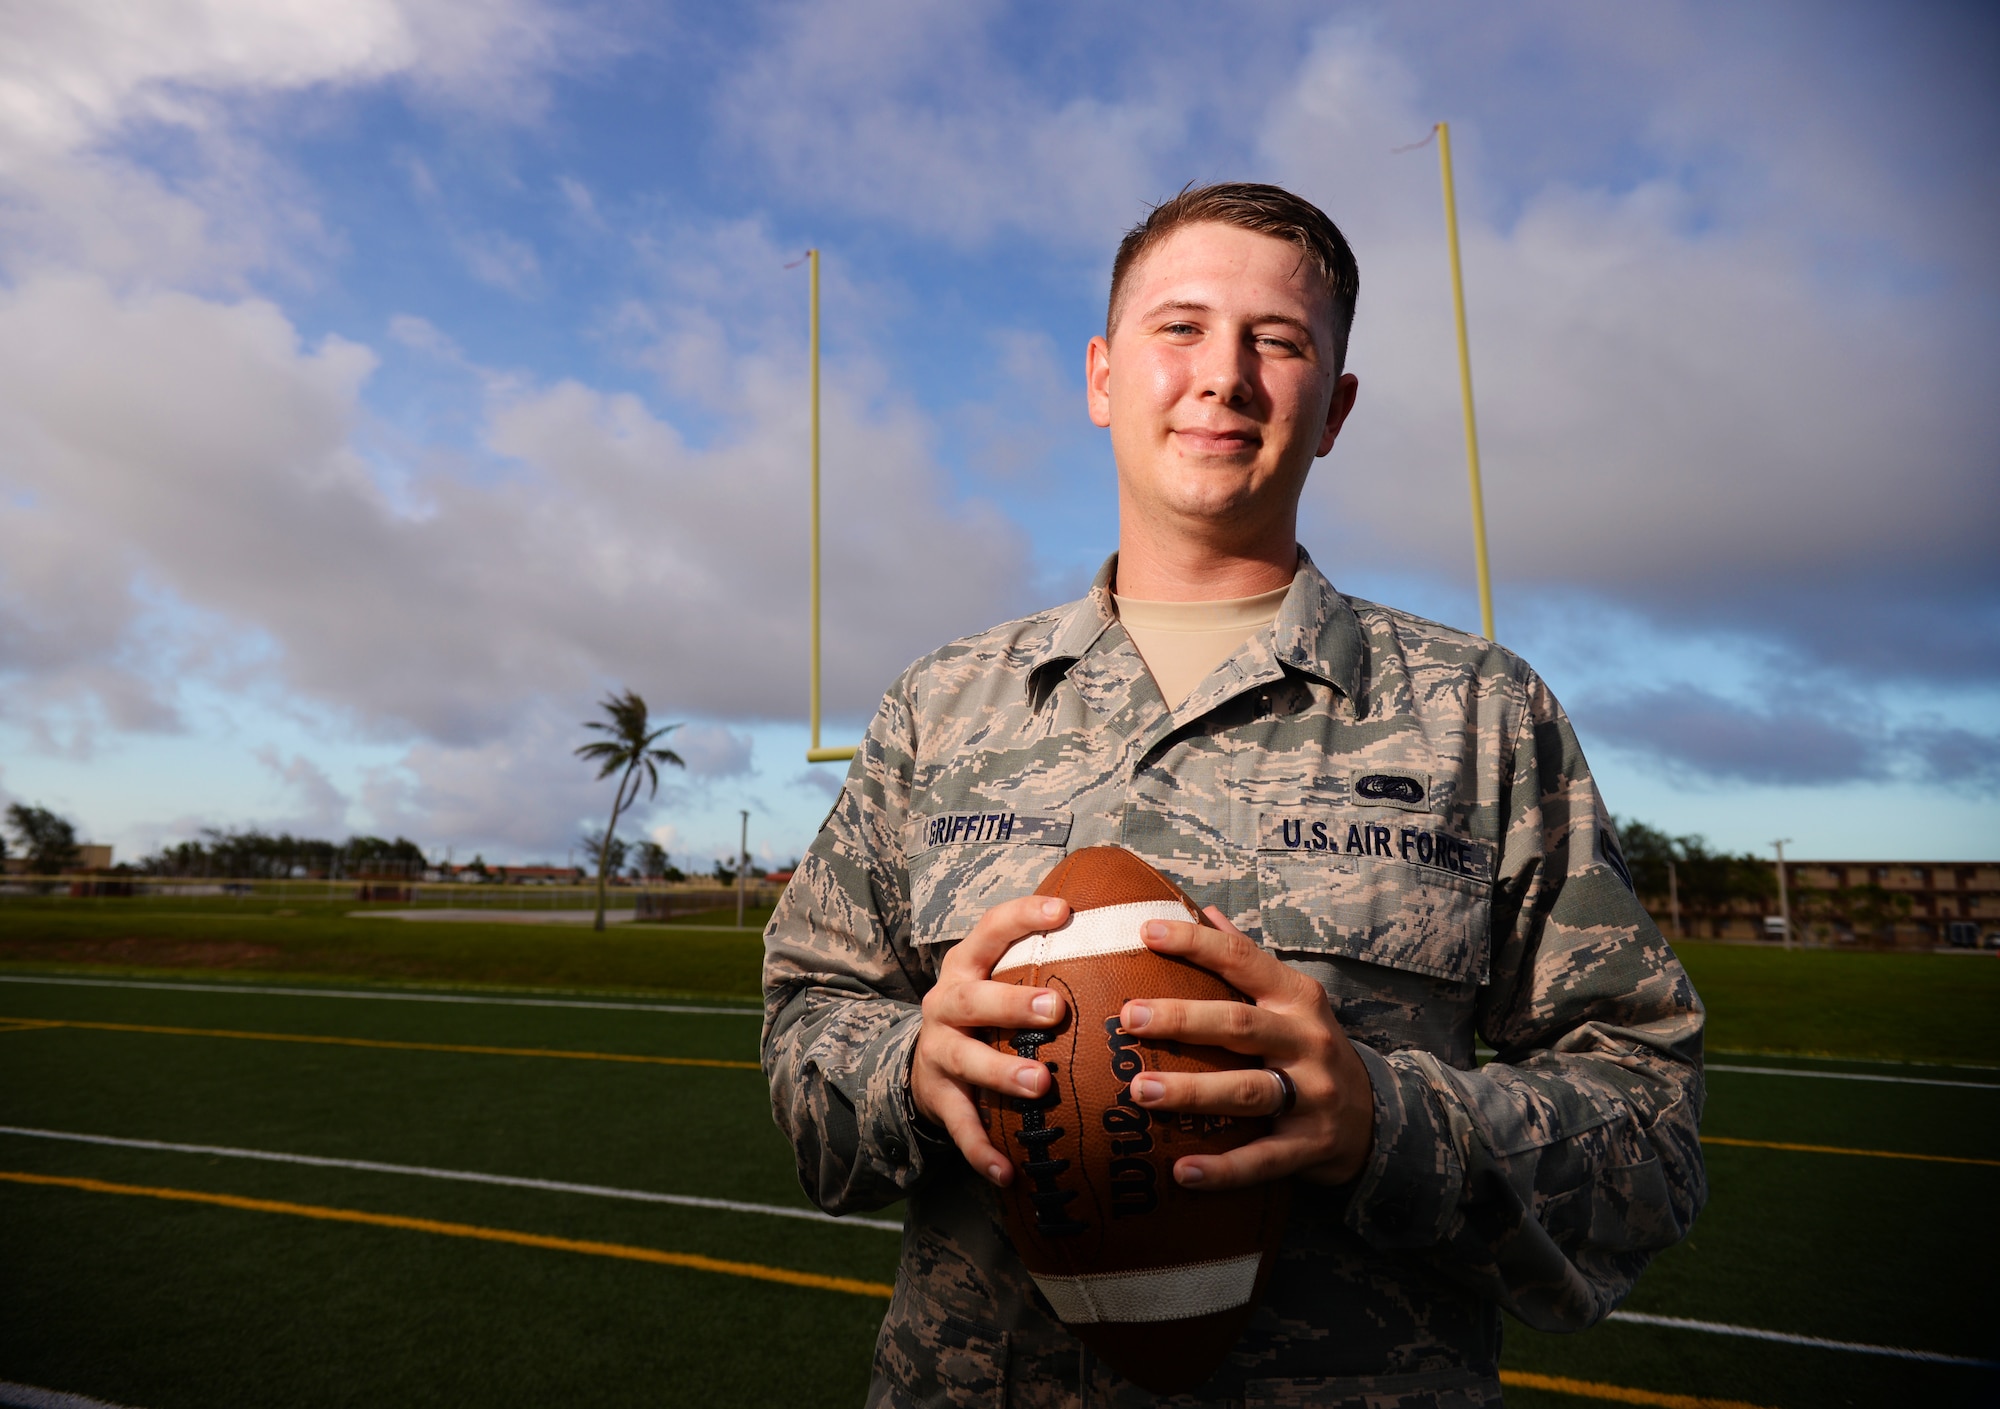 Senior Airman Presley Griffith, 36th Mobility Response Squadron executive assistant, offers a free football spring practice camp as volunteer coach at Andersen Air Force Base, Guam. A former high school quarterback, Griffith is working toward his goal of becoming a high school football coach. (U.S. Air Force photo by Senior Airman Alexander W. Riedel/Released)